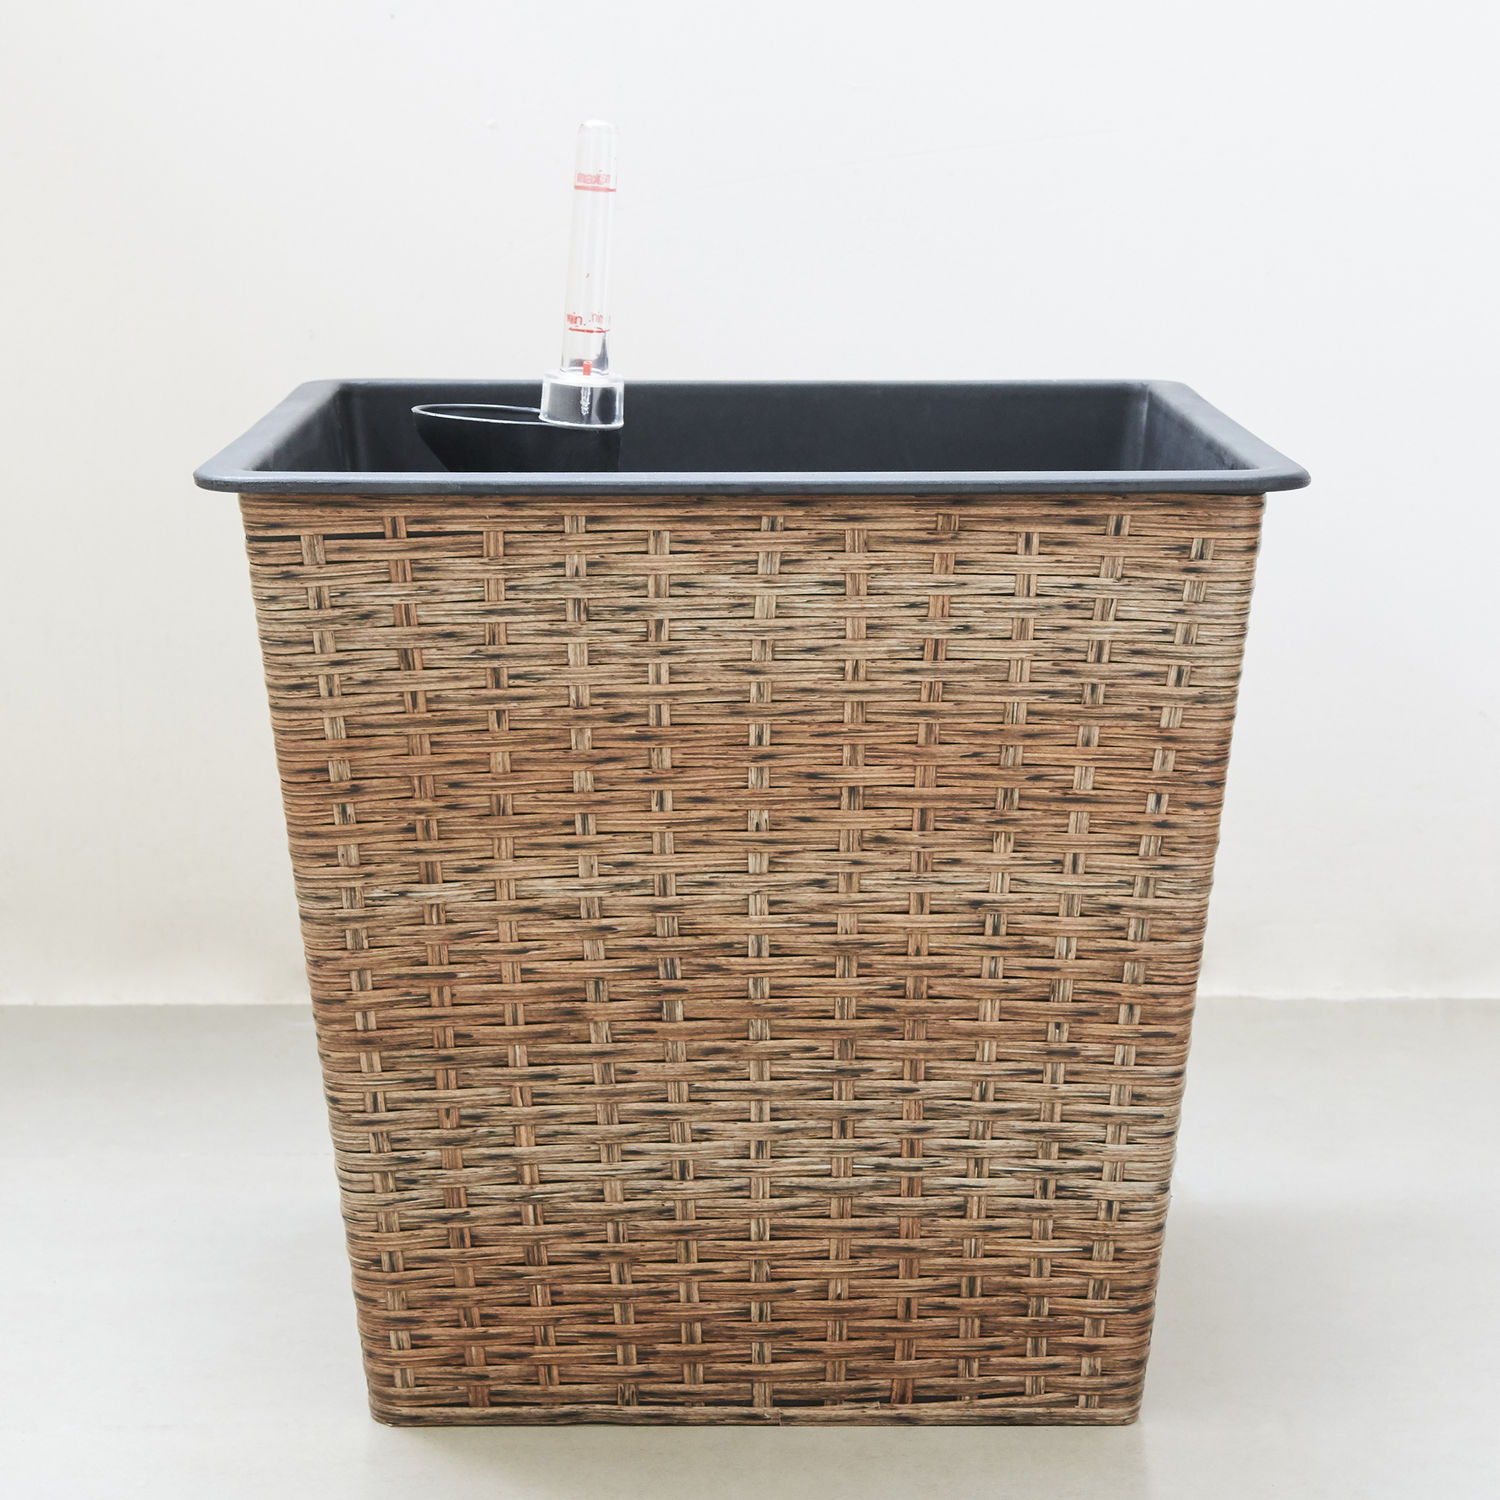 Hatteras 16 x16 x 15 Thin Square Wicker Smart Self-Watering Planter in Light Brown